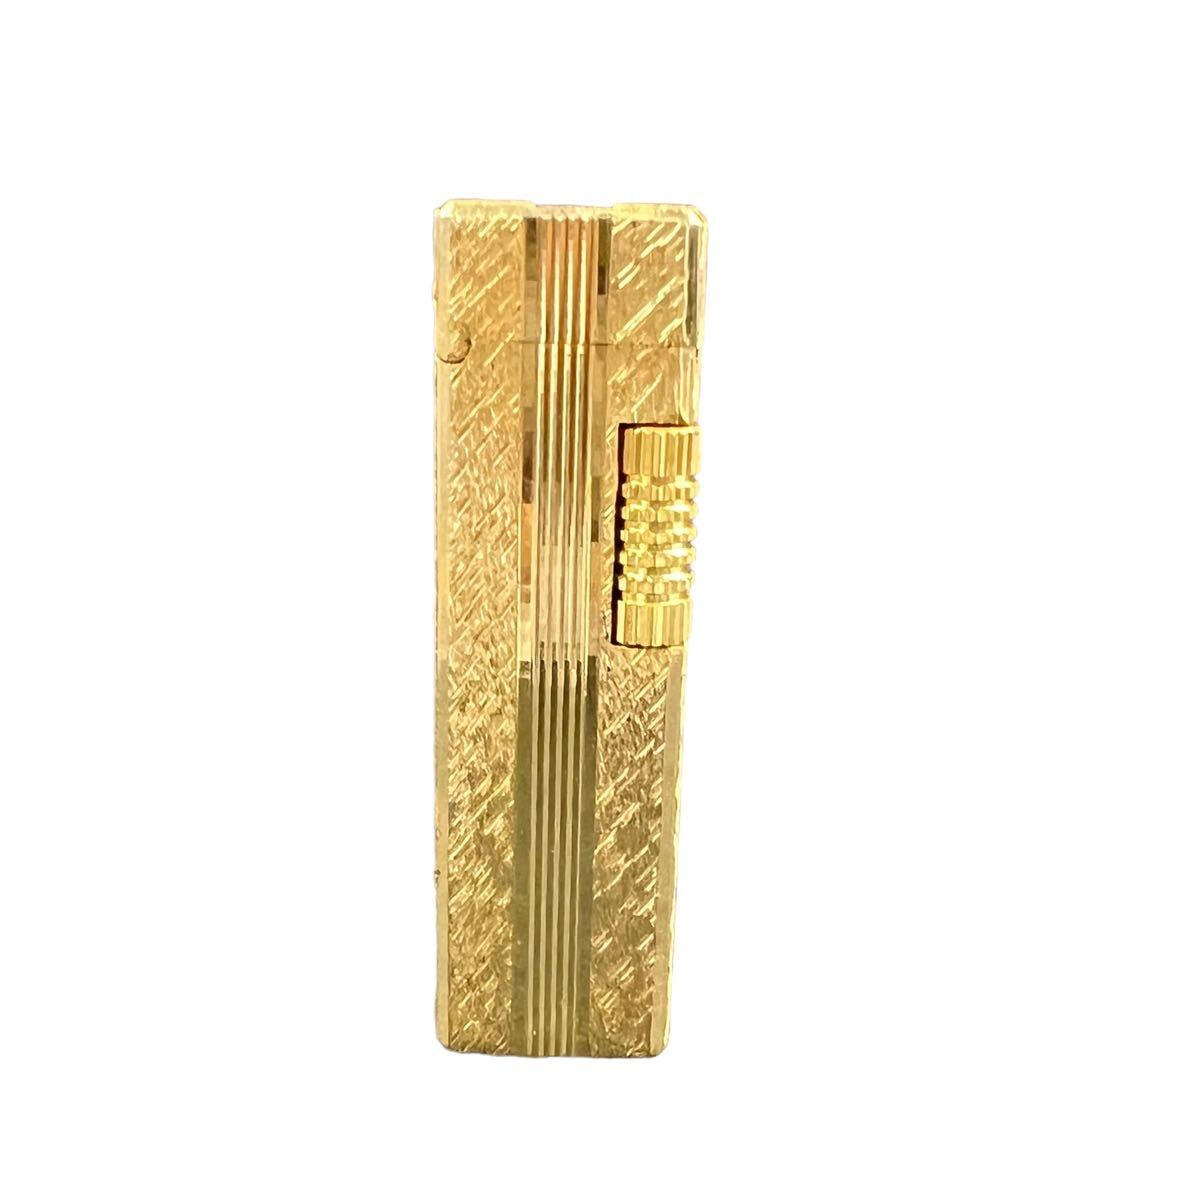 1 jpy ~ selling out Windmill gas lighter lighter Gold color roller smoking goods smoking . windmill case attaching including in a package un- possible [L0953]